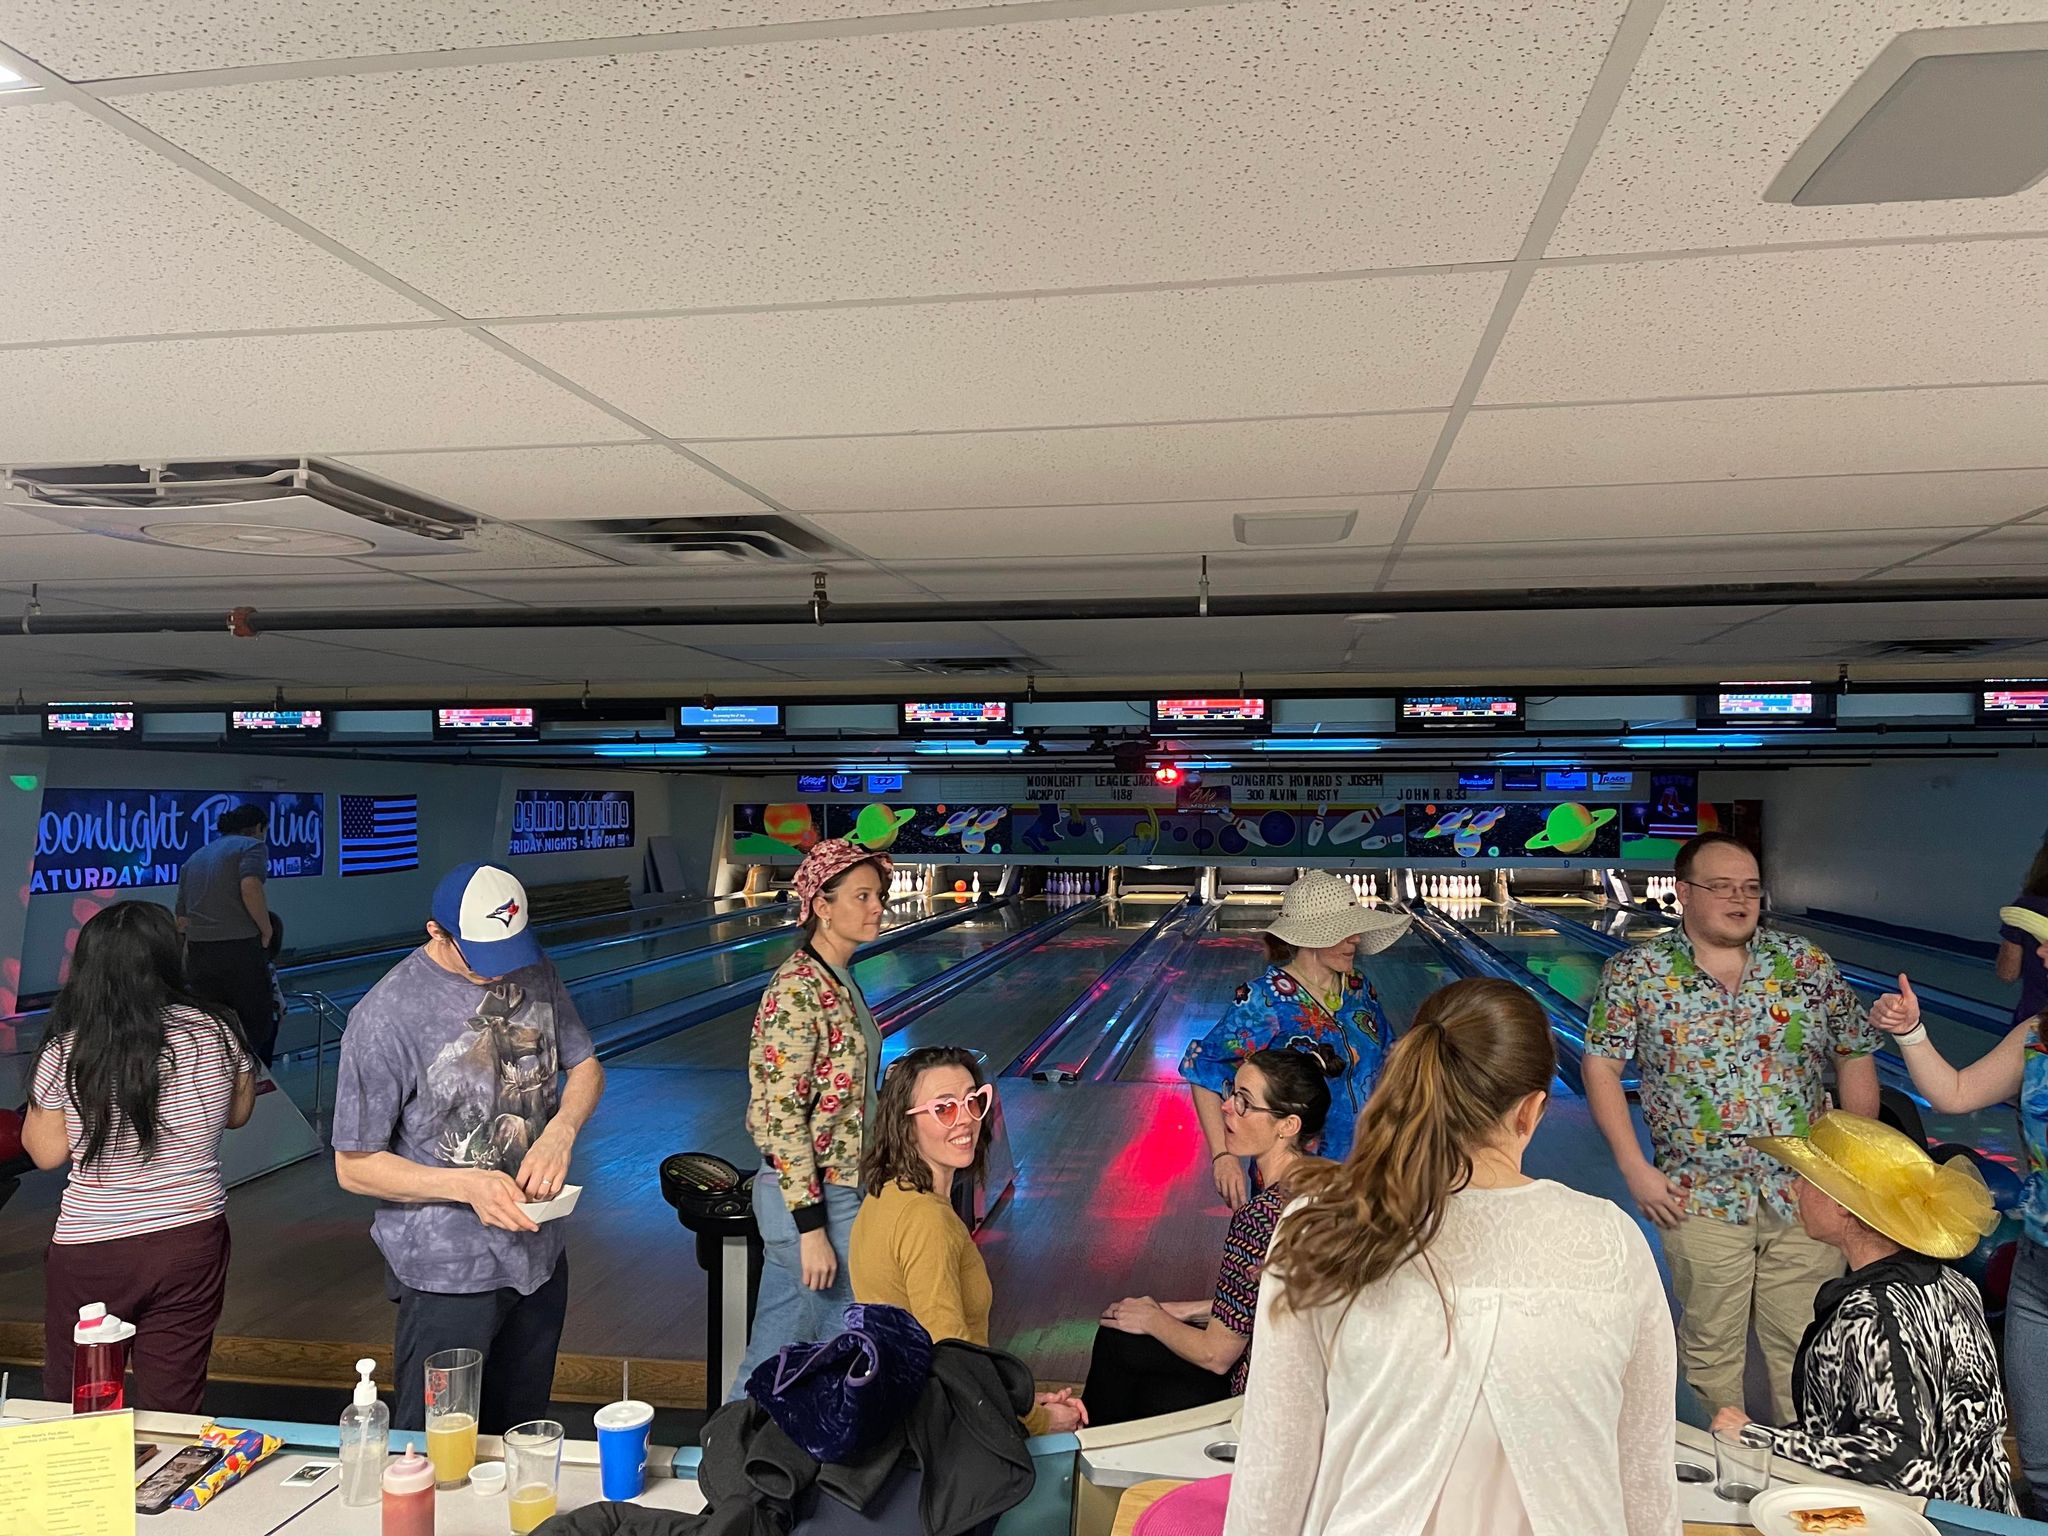 How to Throw a Successful Company Bowling Party